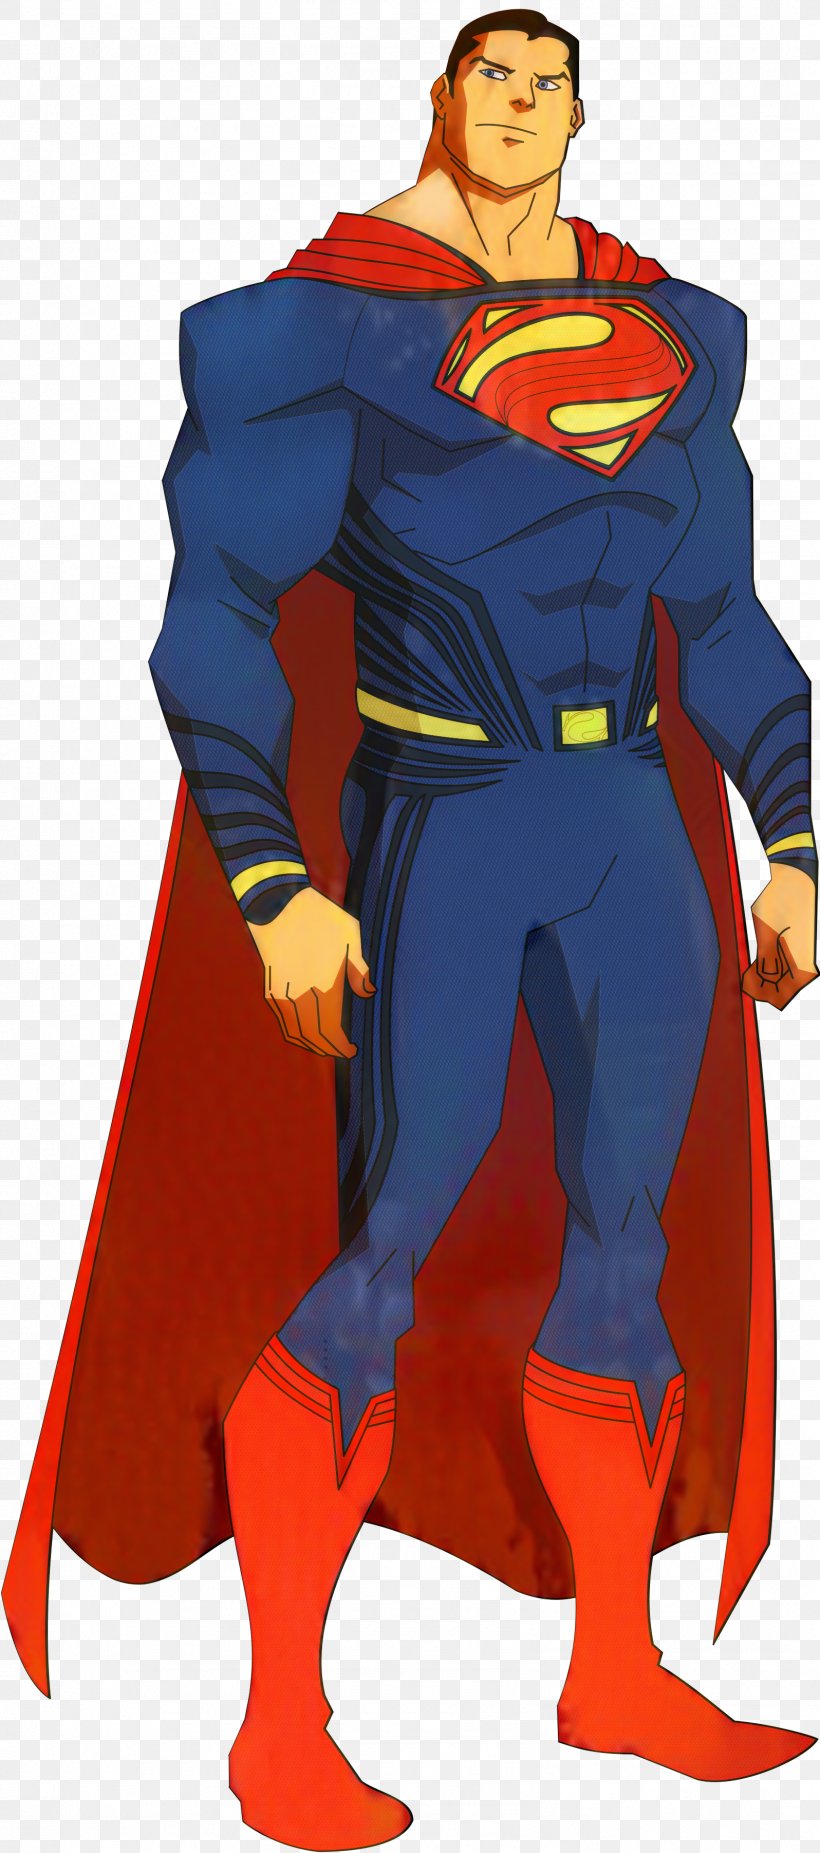 Superman Costume Outerwear Illustration Cartoon, PNG, 1596x3607px, Superman, Cartoon, Costume, Electric Blue, Fictional Character Download Free